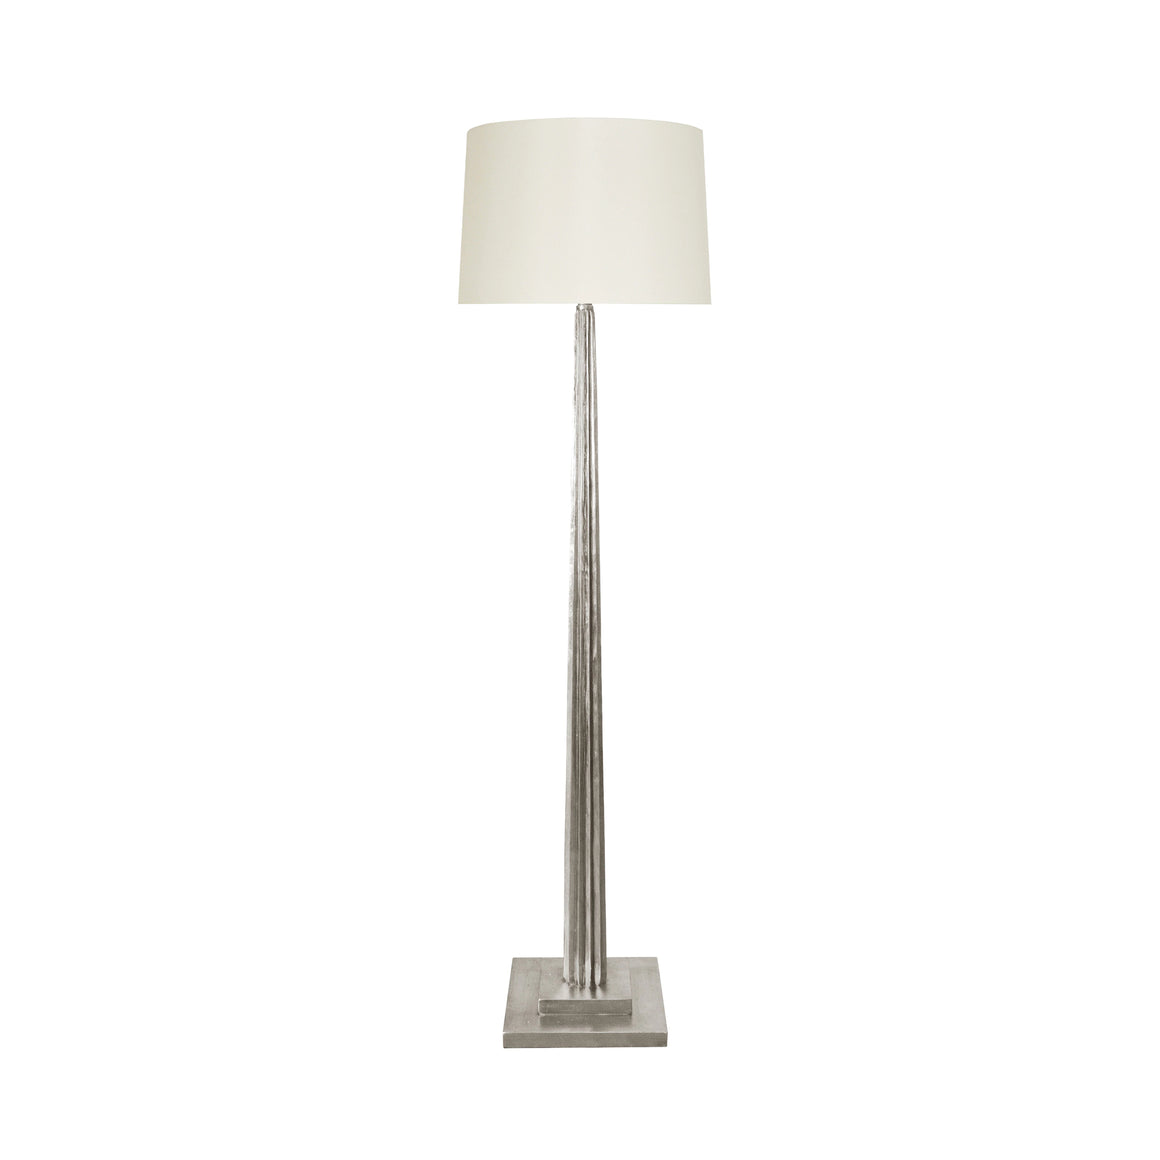 Worlds Away Capone Floor Lamp - Silver Leaf